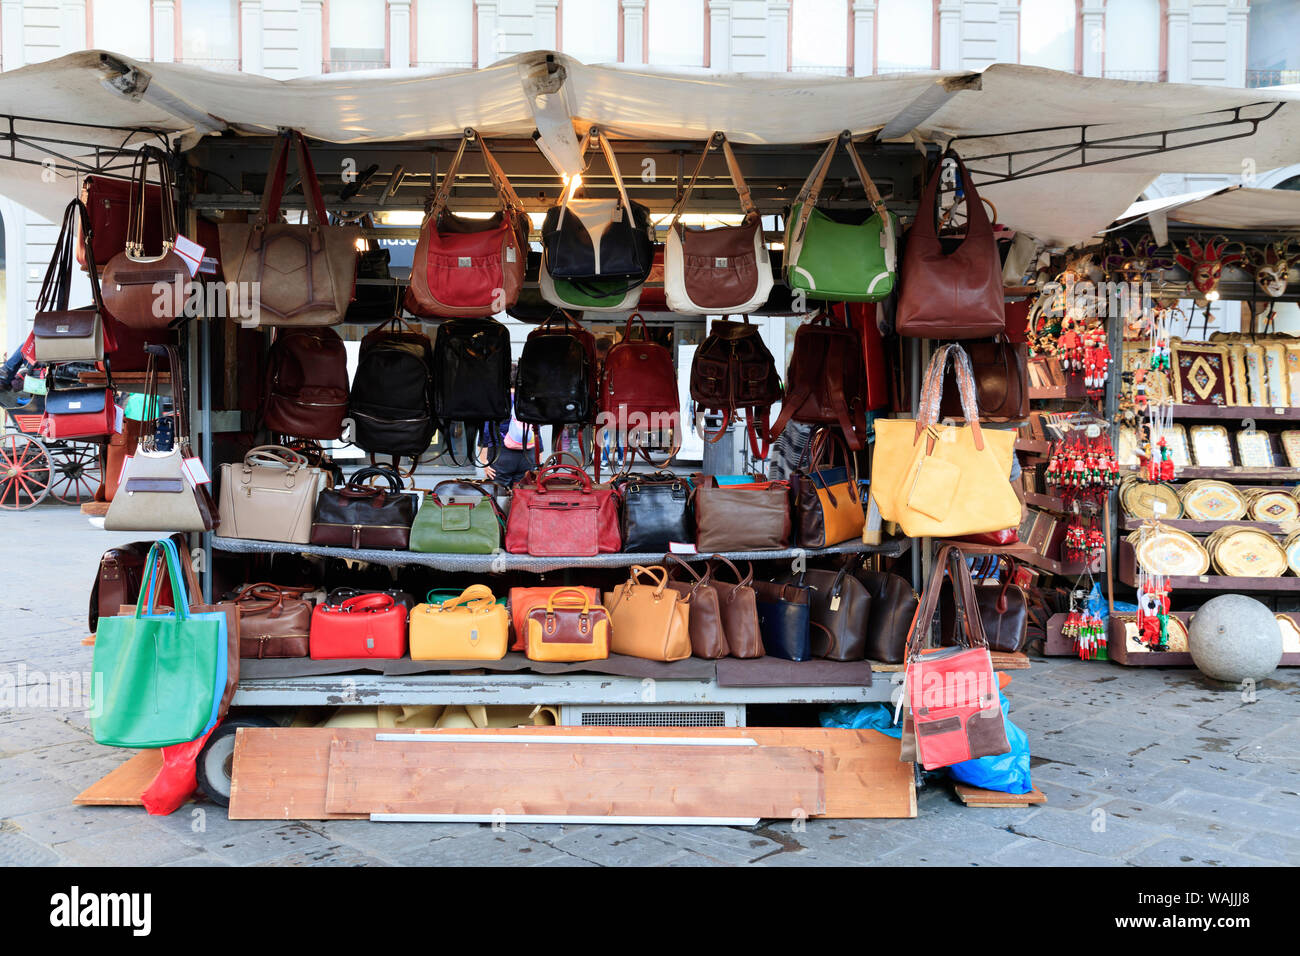 Leather bags purses handbags wallets on market stall Rome Italy Stock Photo  - Alamy